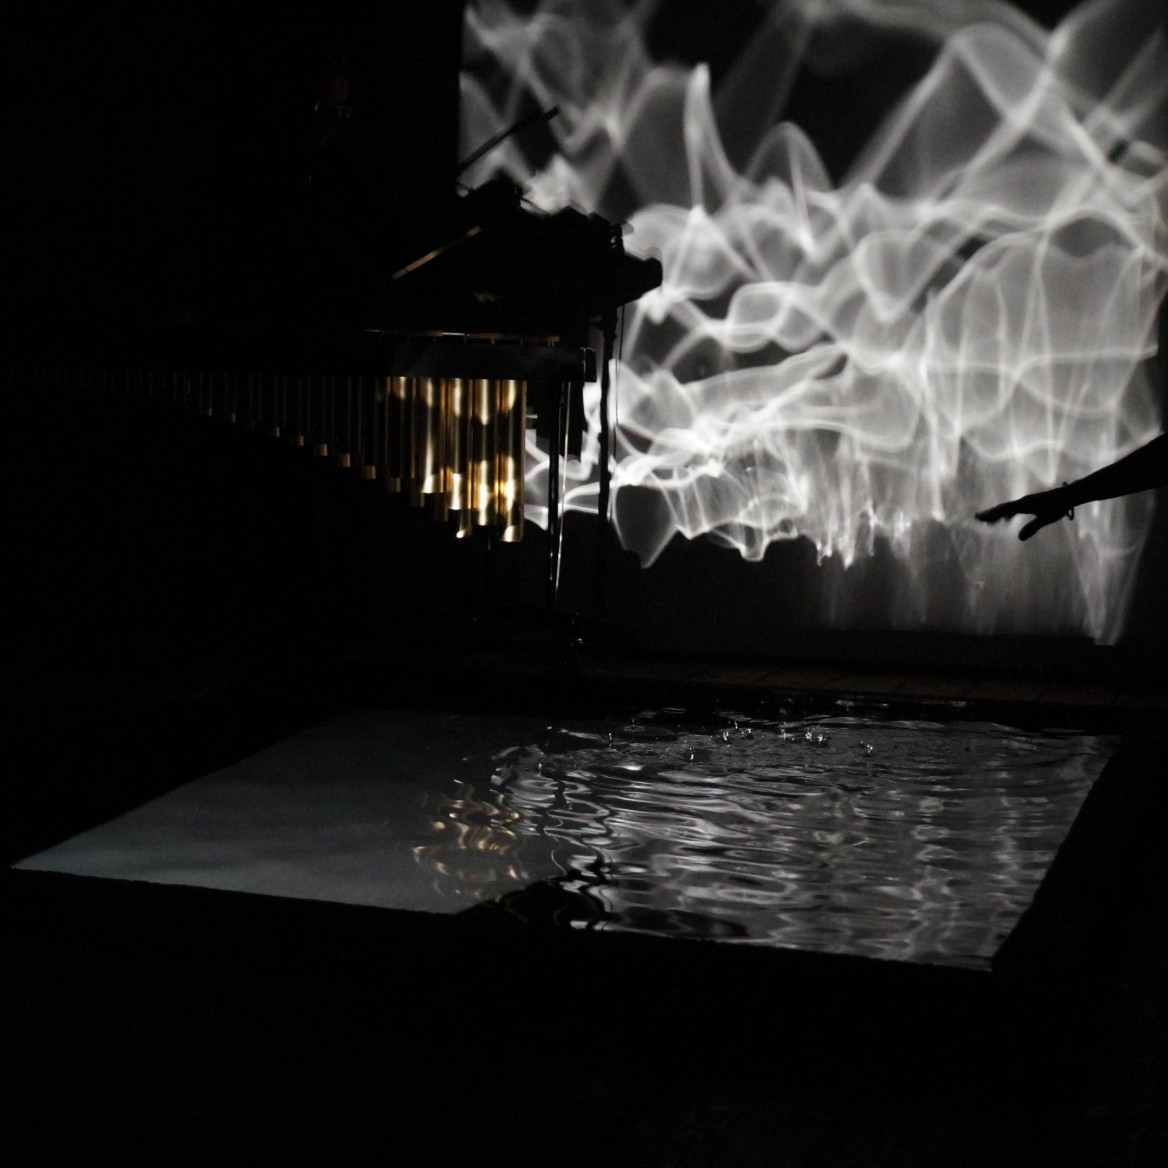 Kate interacts with a shallow square pool of water as sound vibrations create ripples in the water which are reflected onto a wall